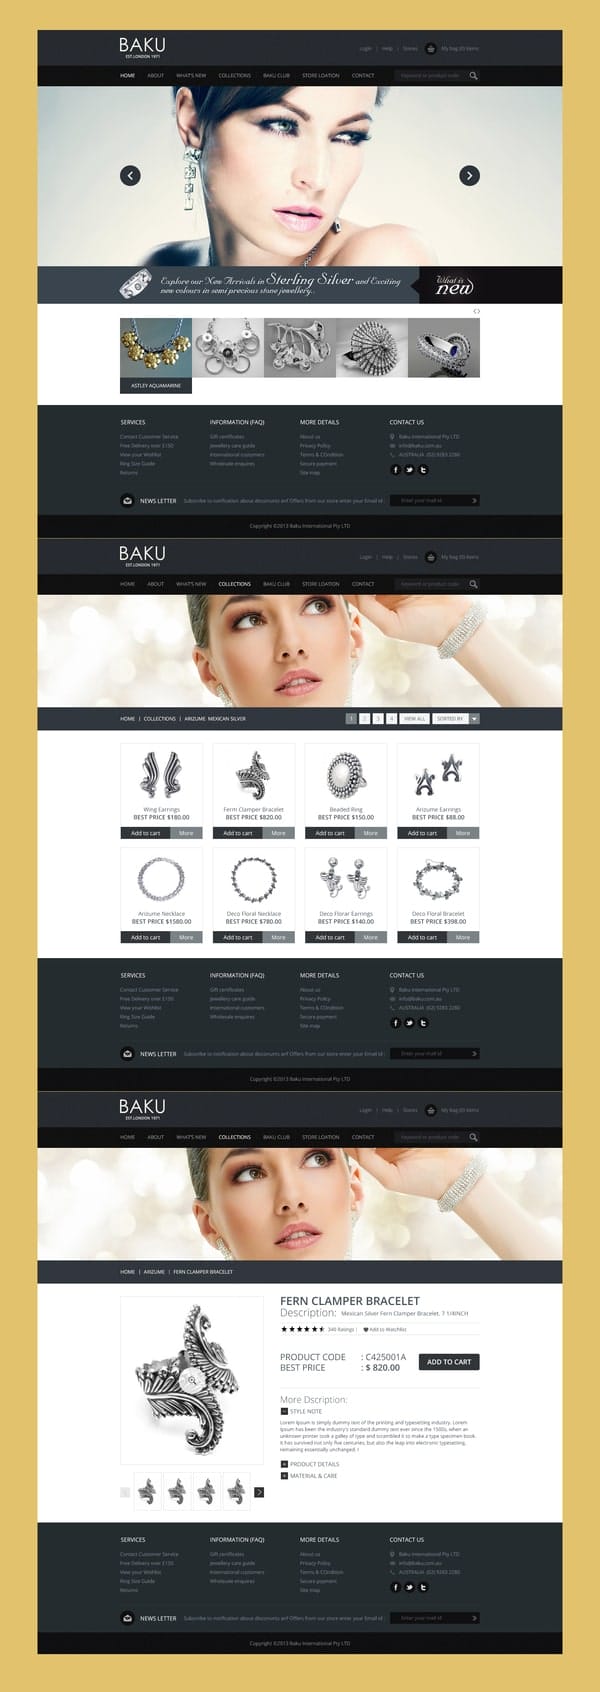 Online store template